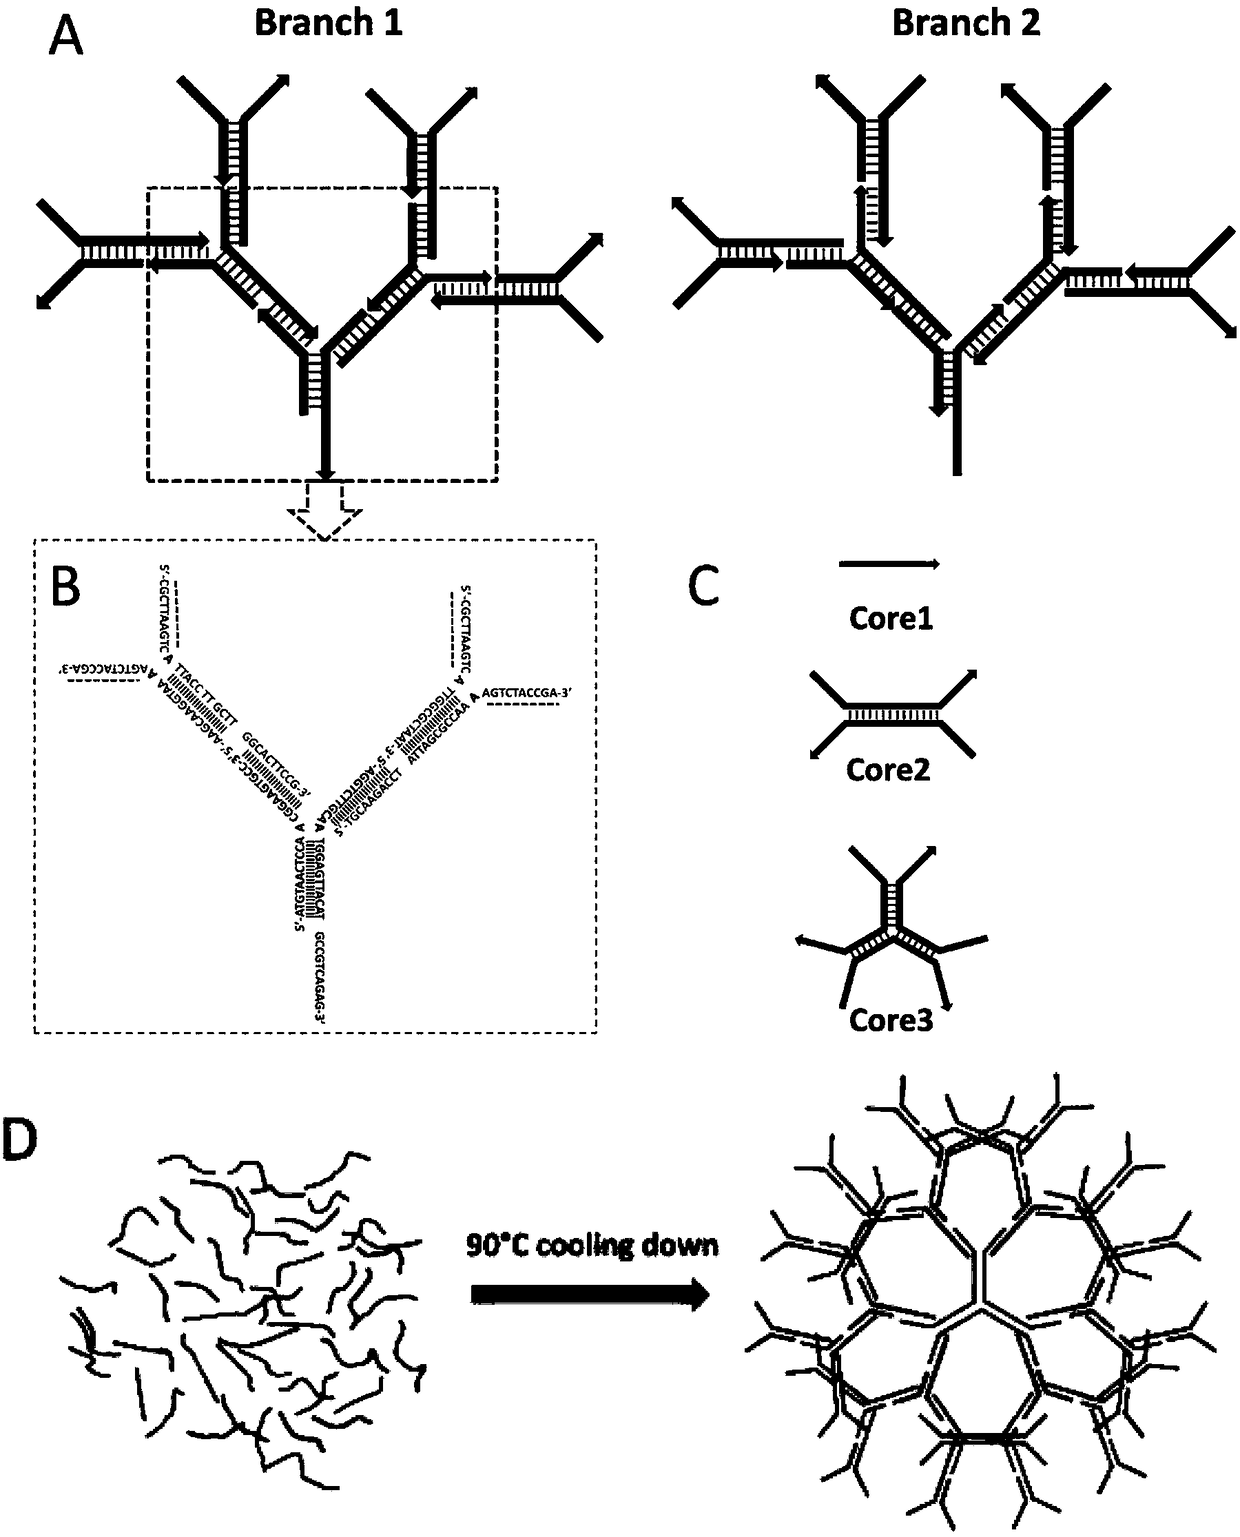 Preparation method and application of dendritic DNA assembly